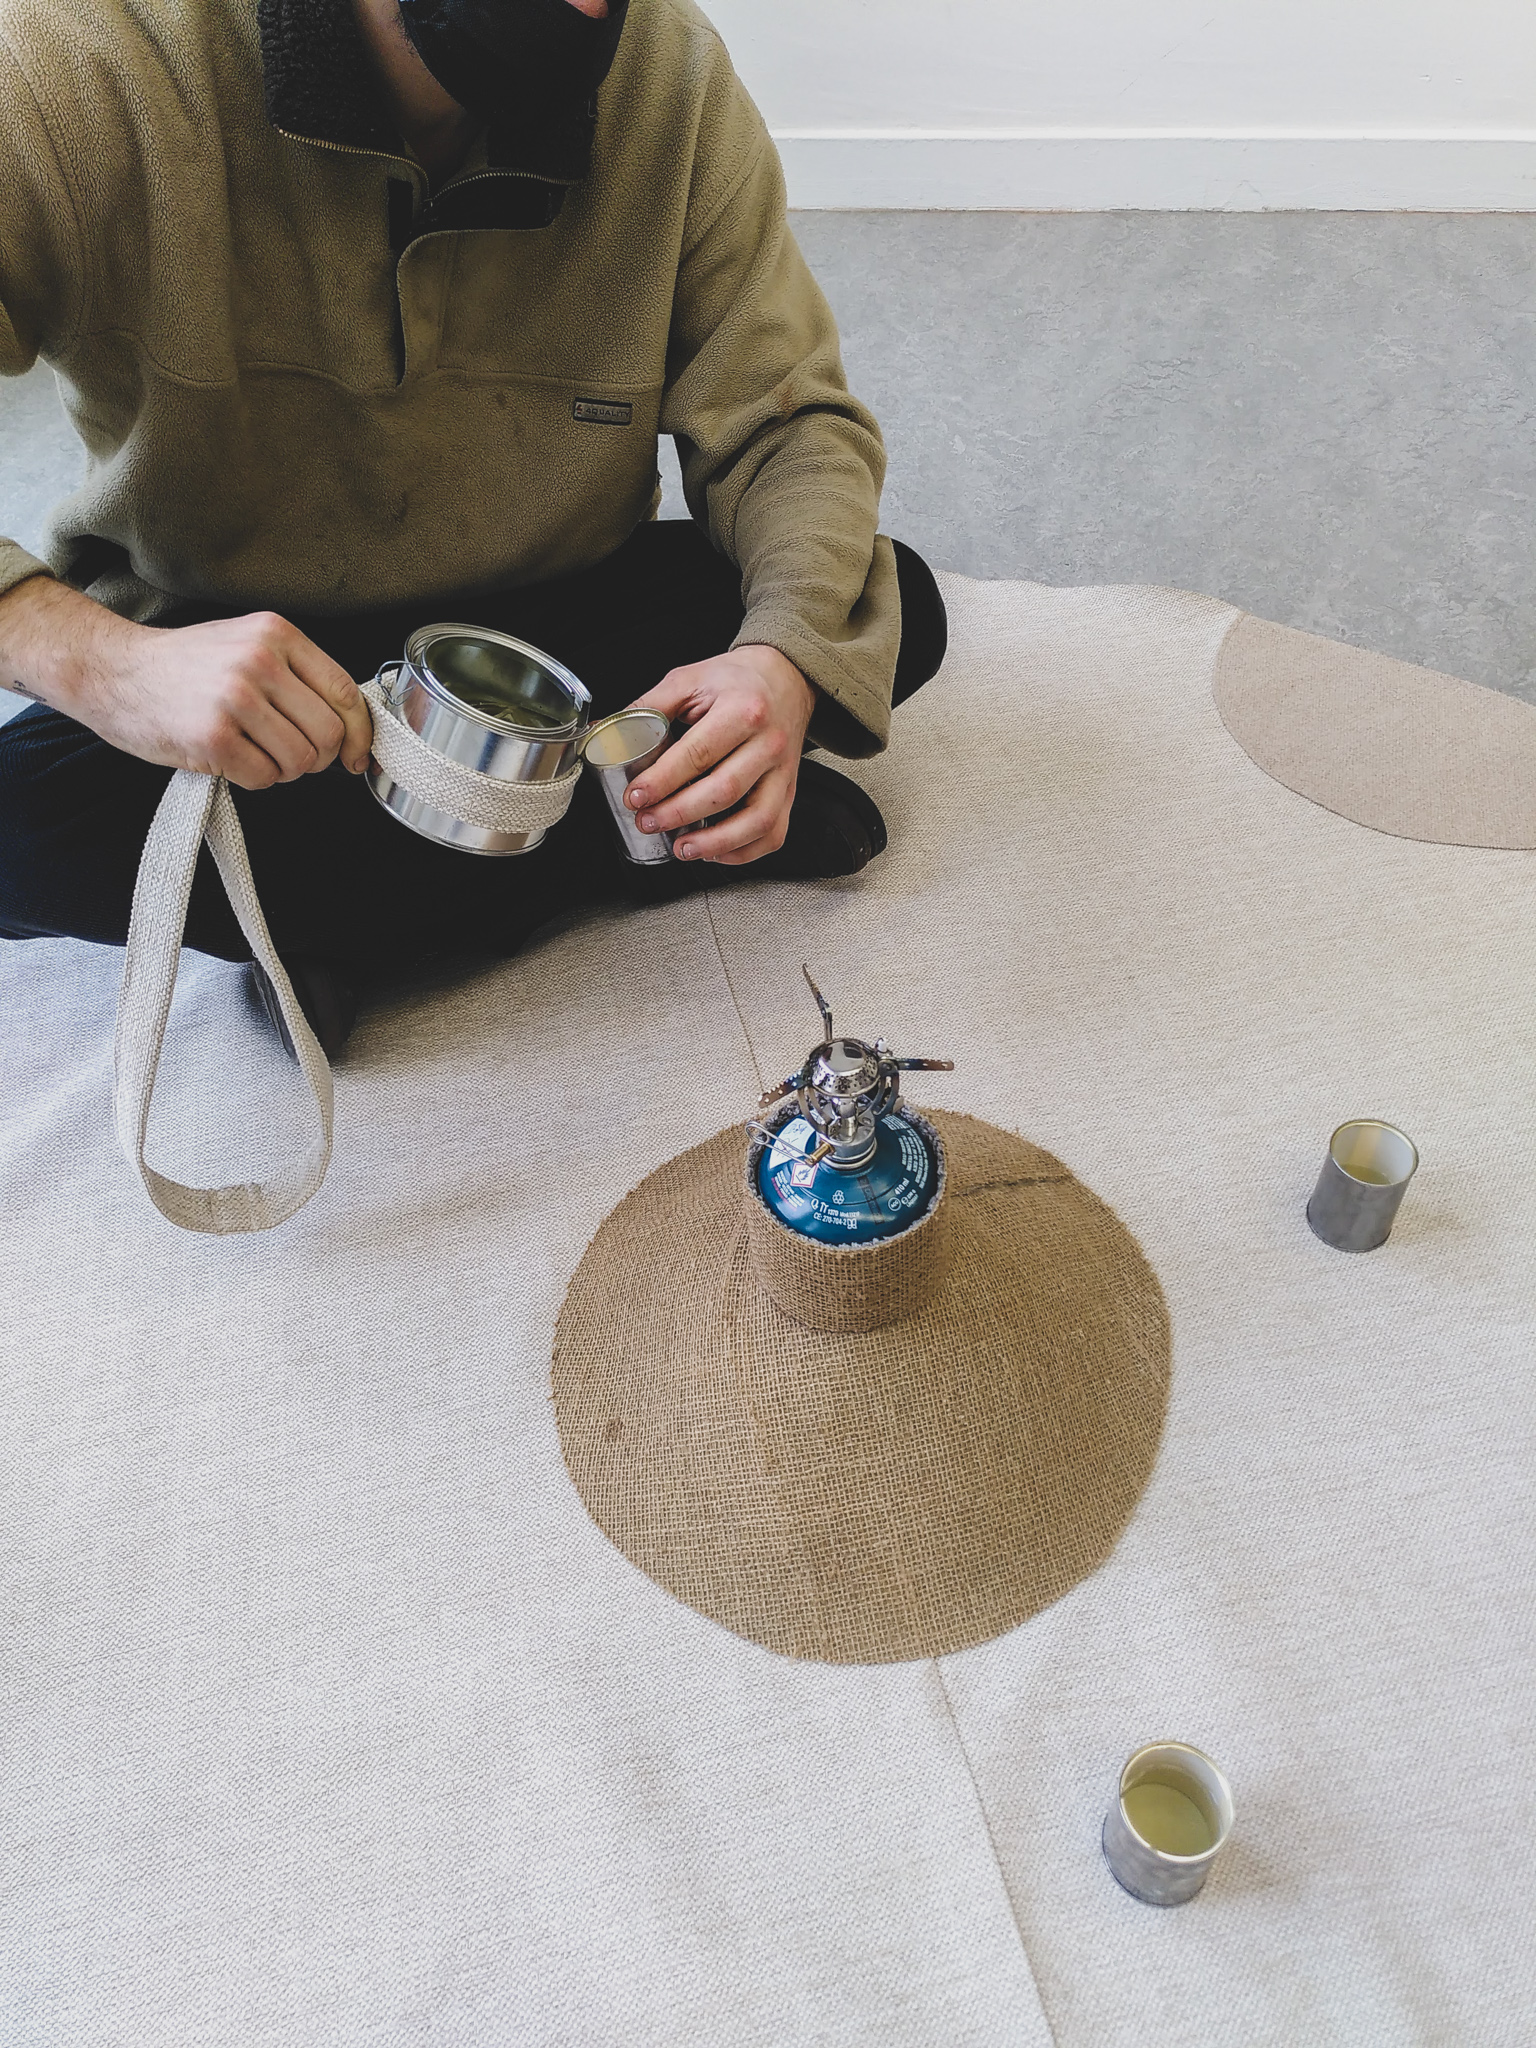 Wearable Space for Tea & Dialogue by Elke Cuppens - Creative Work - $i